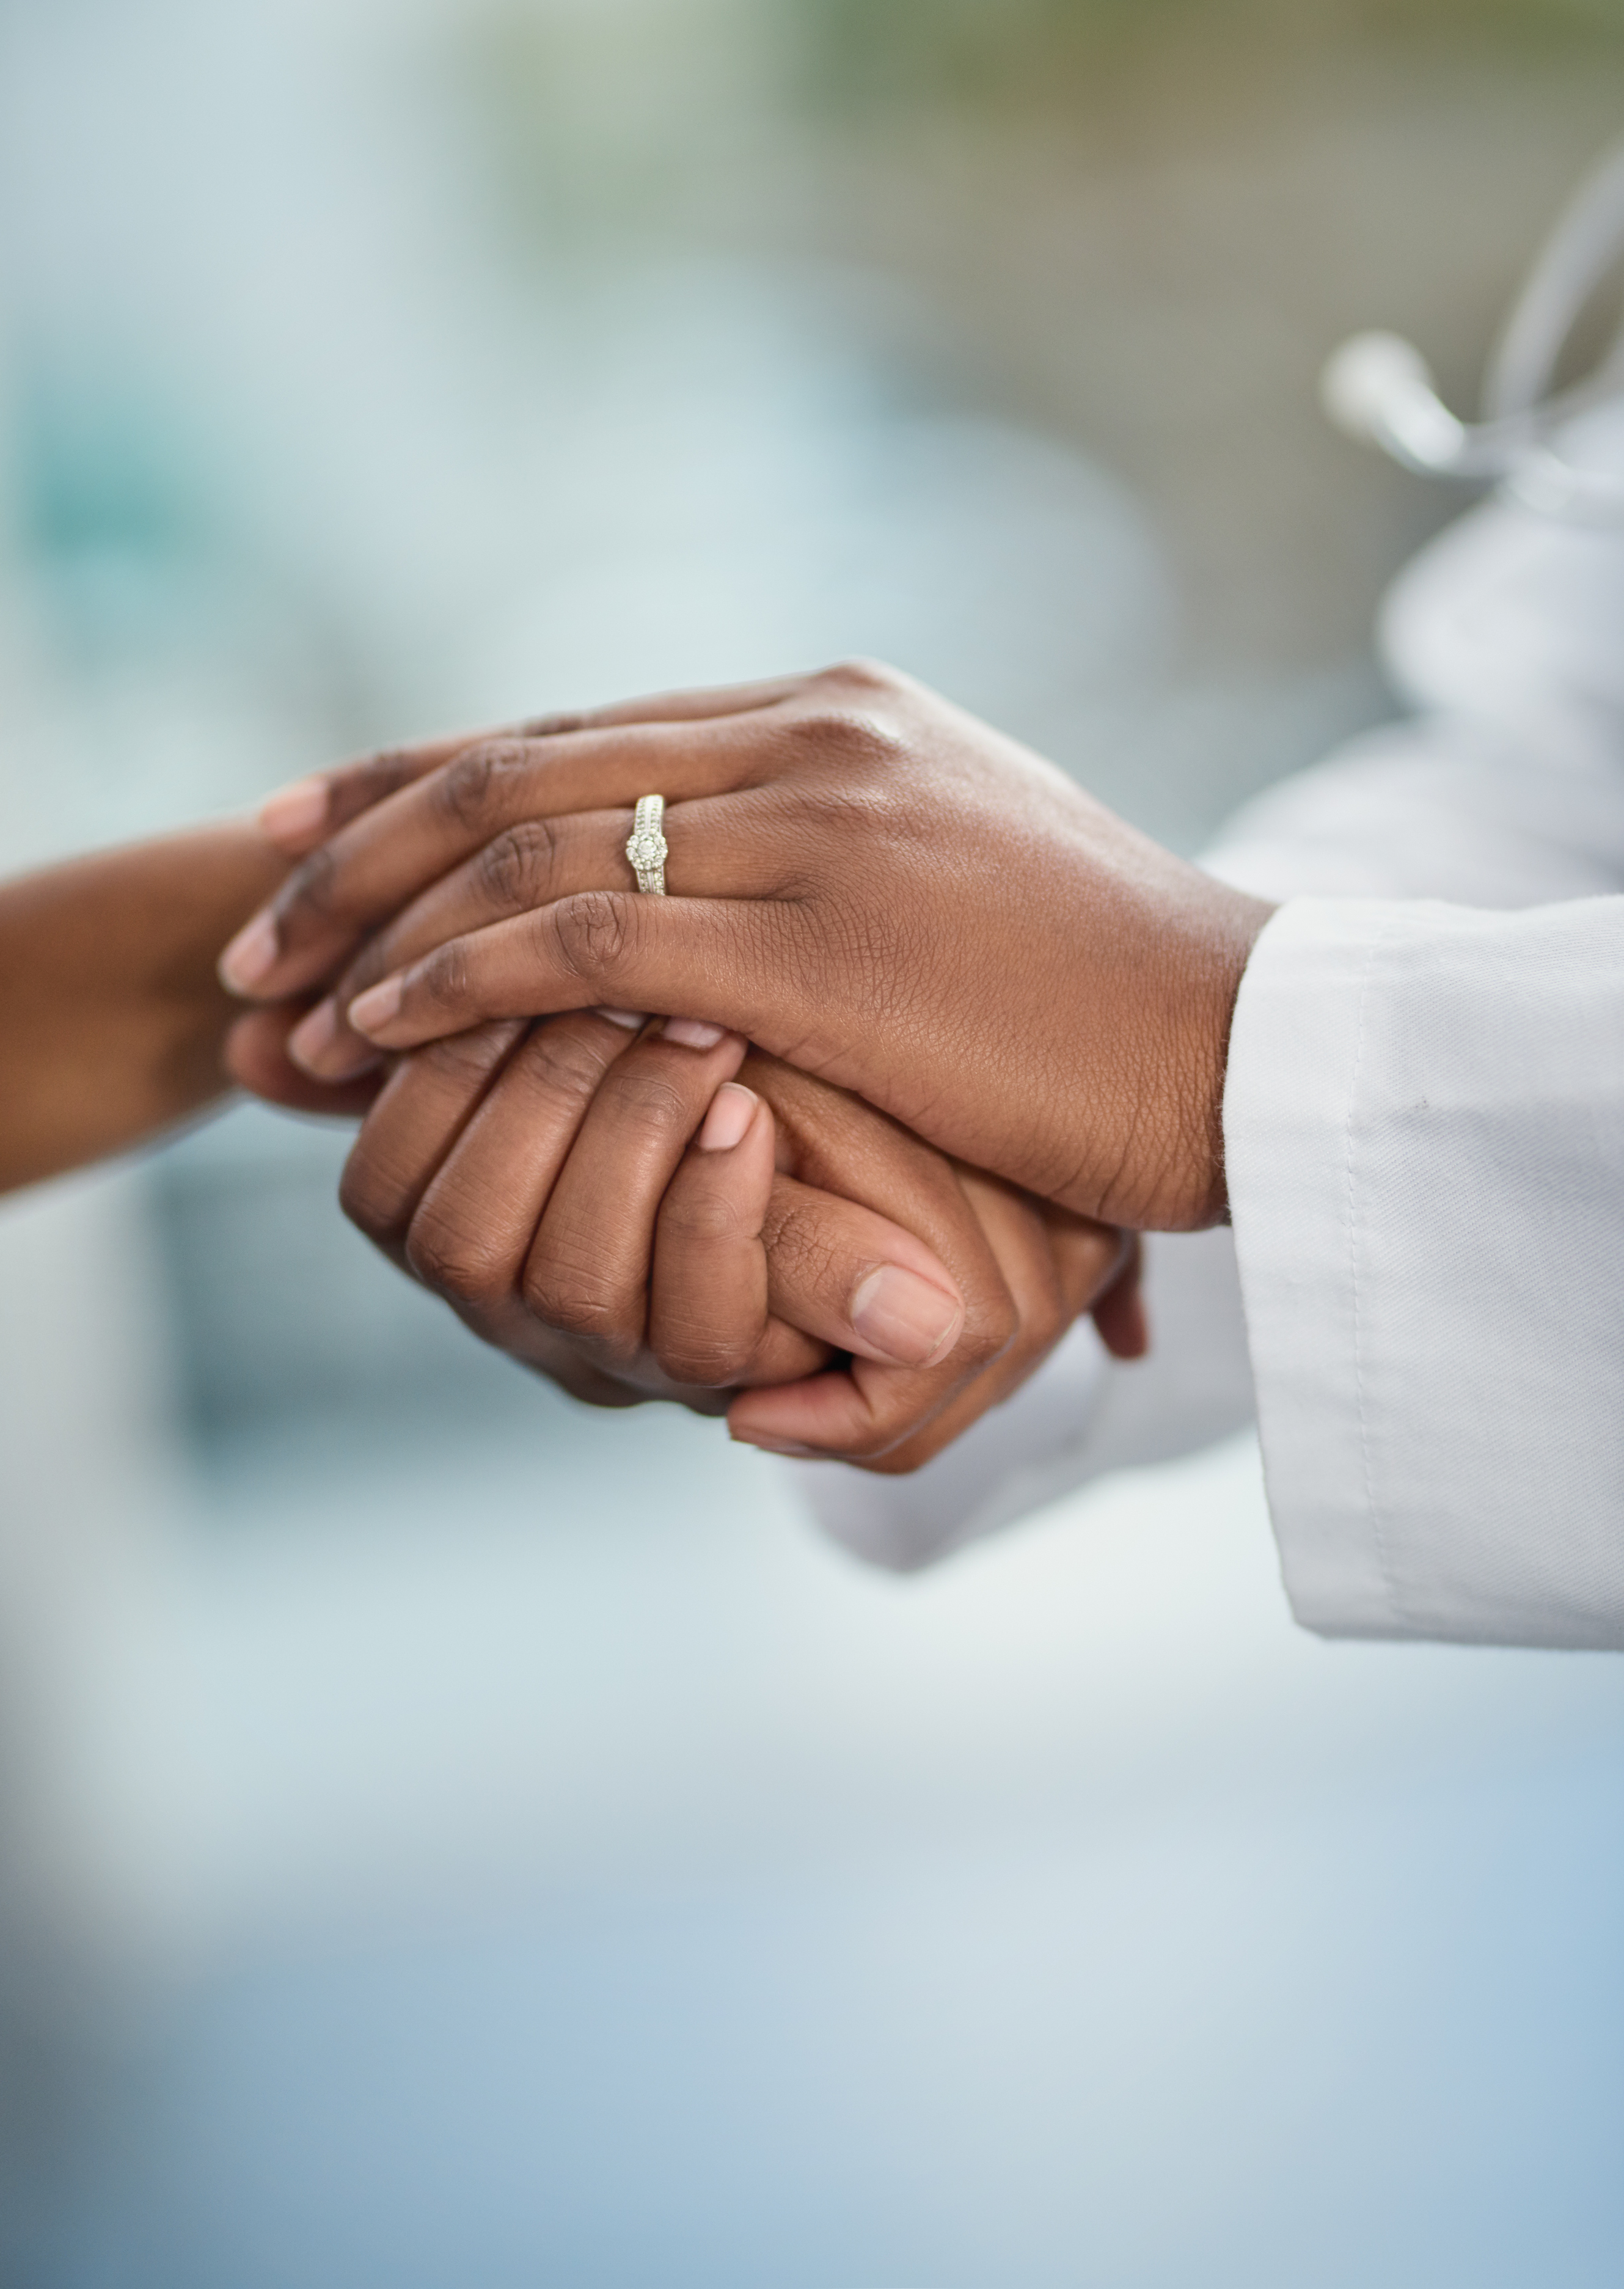 Closeup shot of a doctor holding a patient's hand in comfort